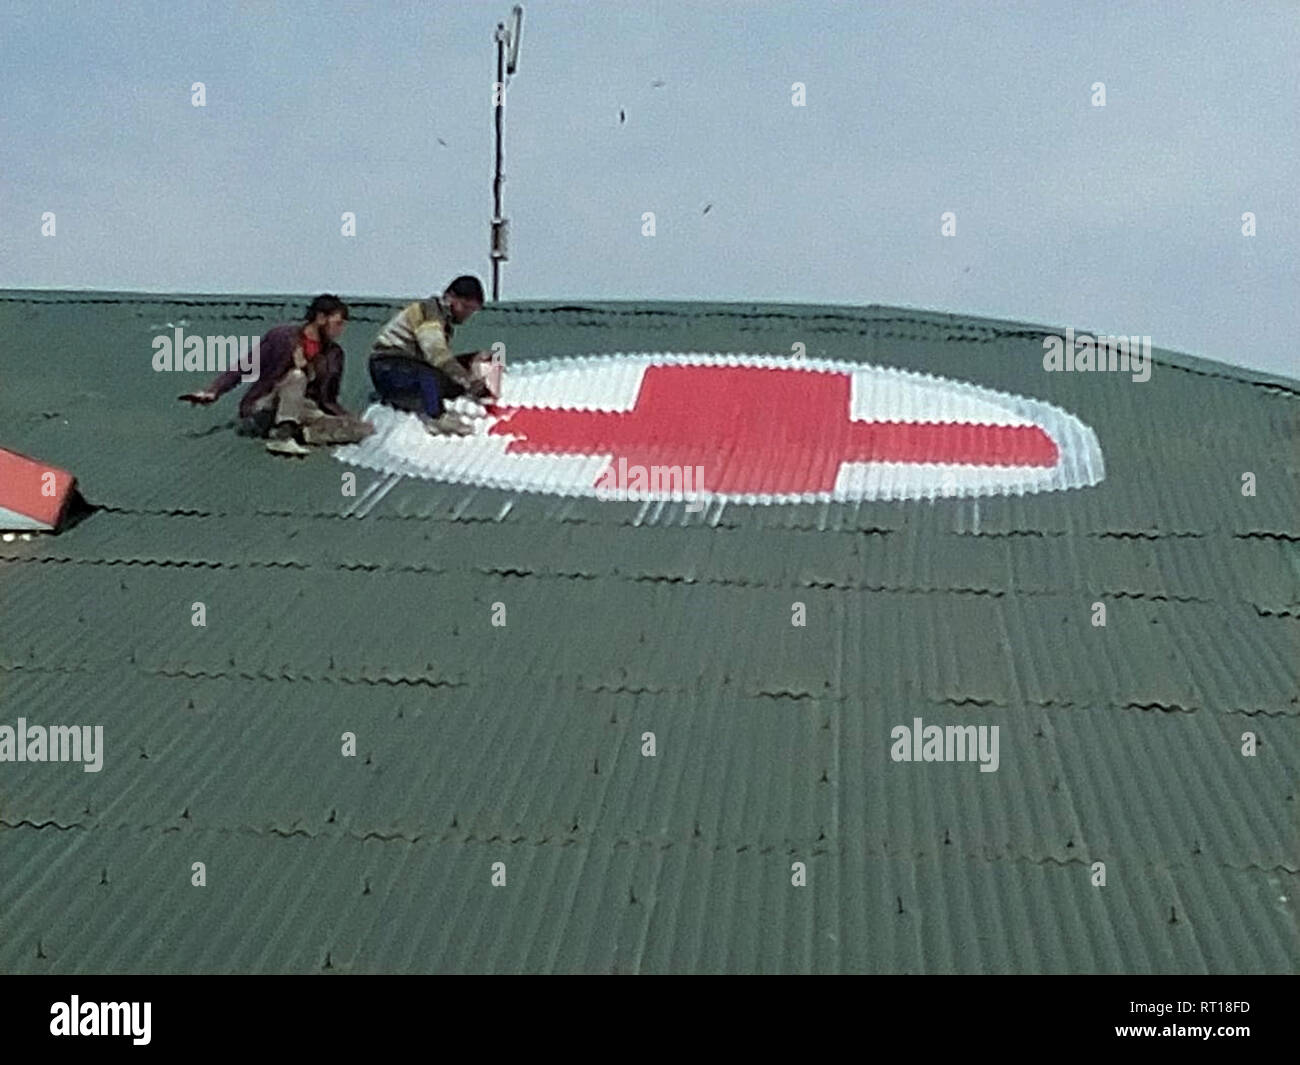 Srinagar, Kashmir. 27th Feb 2019.A Kashmiri worker paints the red and white medical emblem of cross on the roof of SMHS hospital as tensions escalate between India and Pakistan Credit: sofi suhail/Alamy Live News Stock Photo